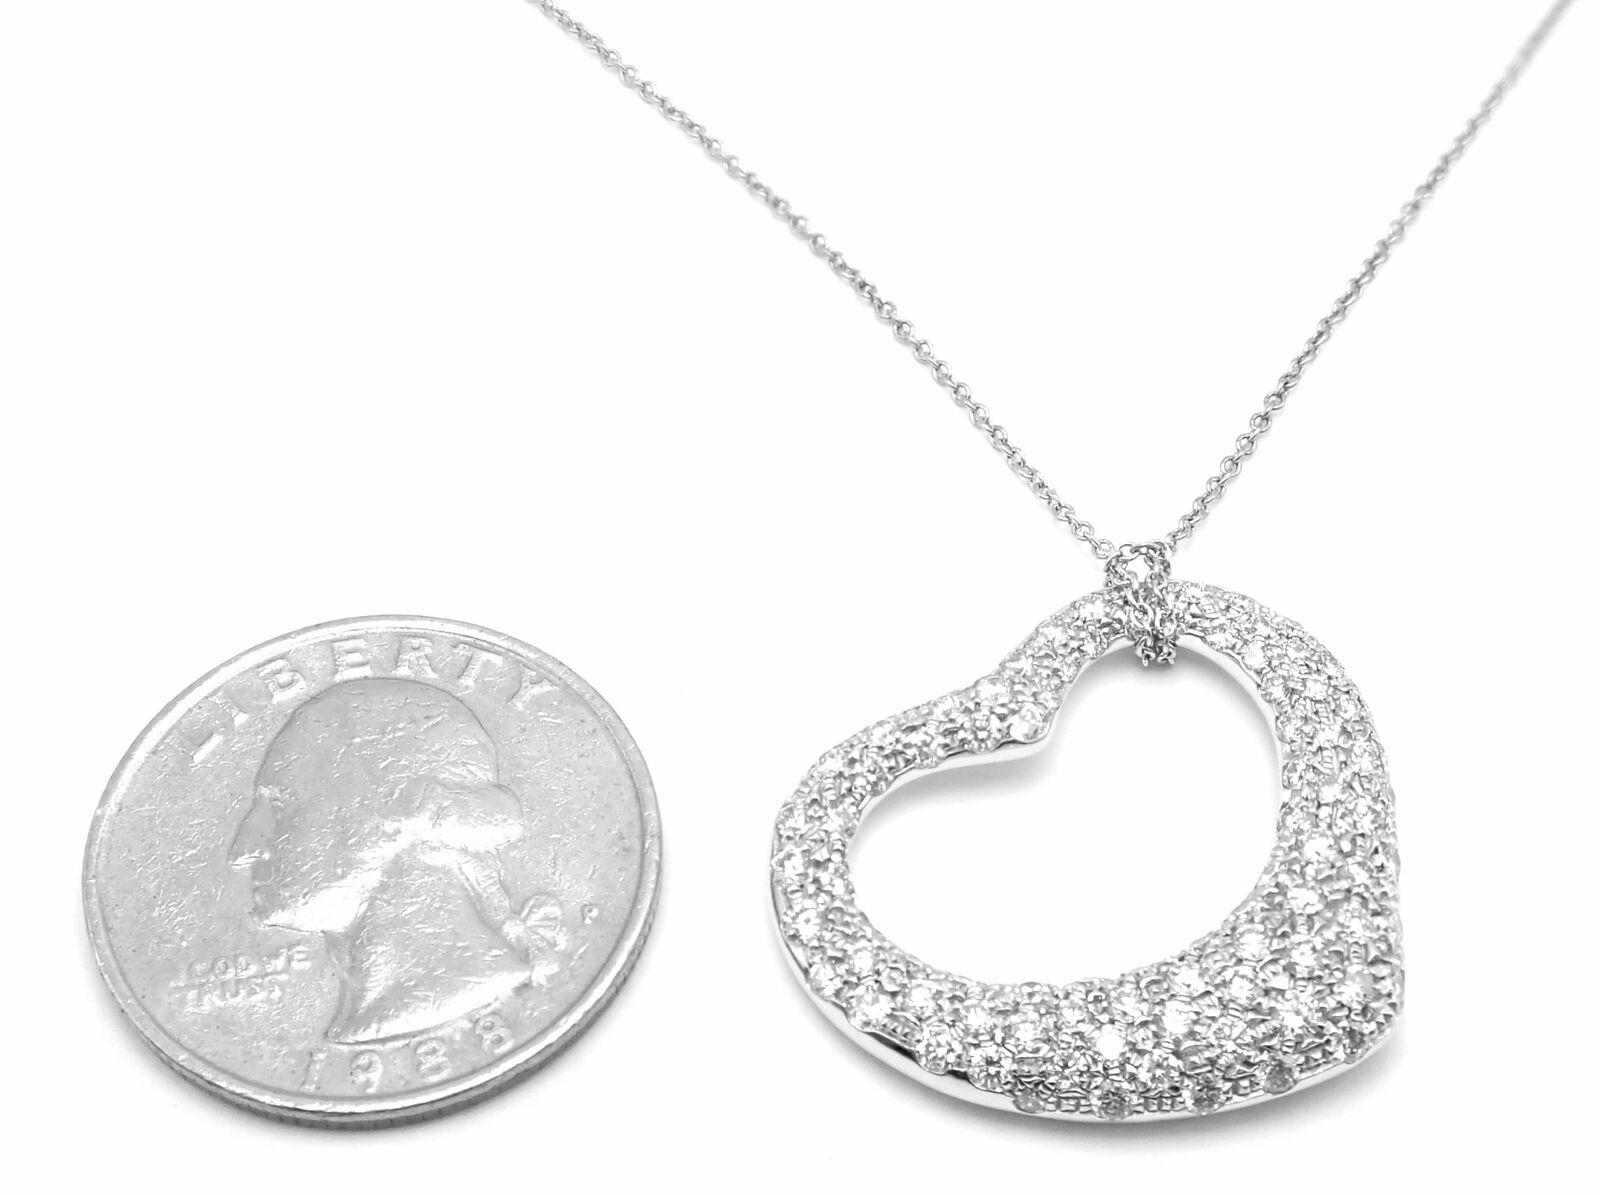 Tiffany & Co. Jewelry & Watches:Fine Jewelry:Necklaces & Pendants Authentic Tiffany & Co Peretti Platinum Diamond Large Open Heart Necklace $26000